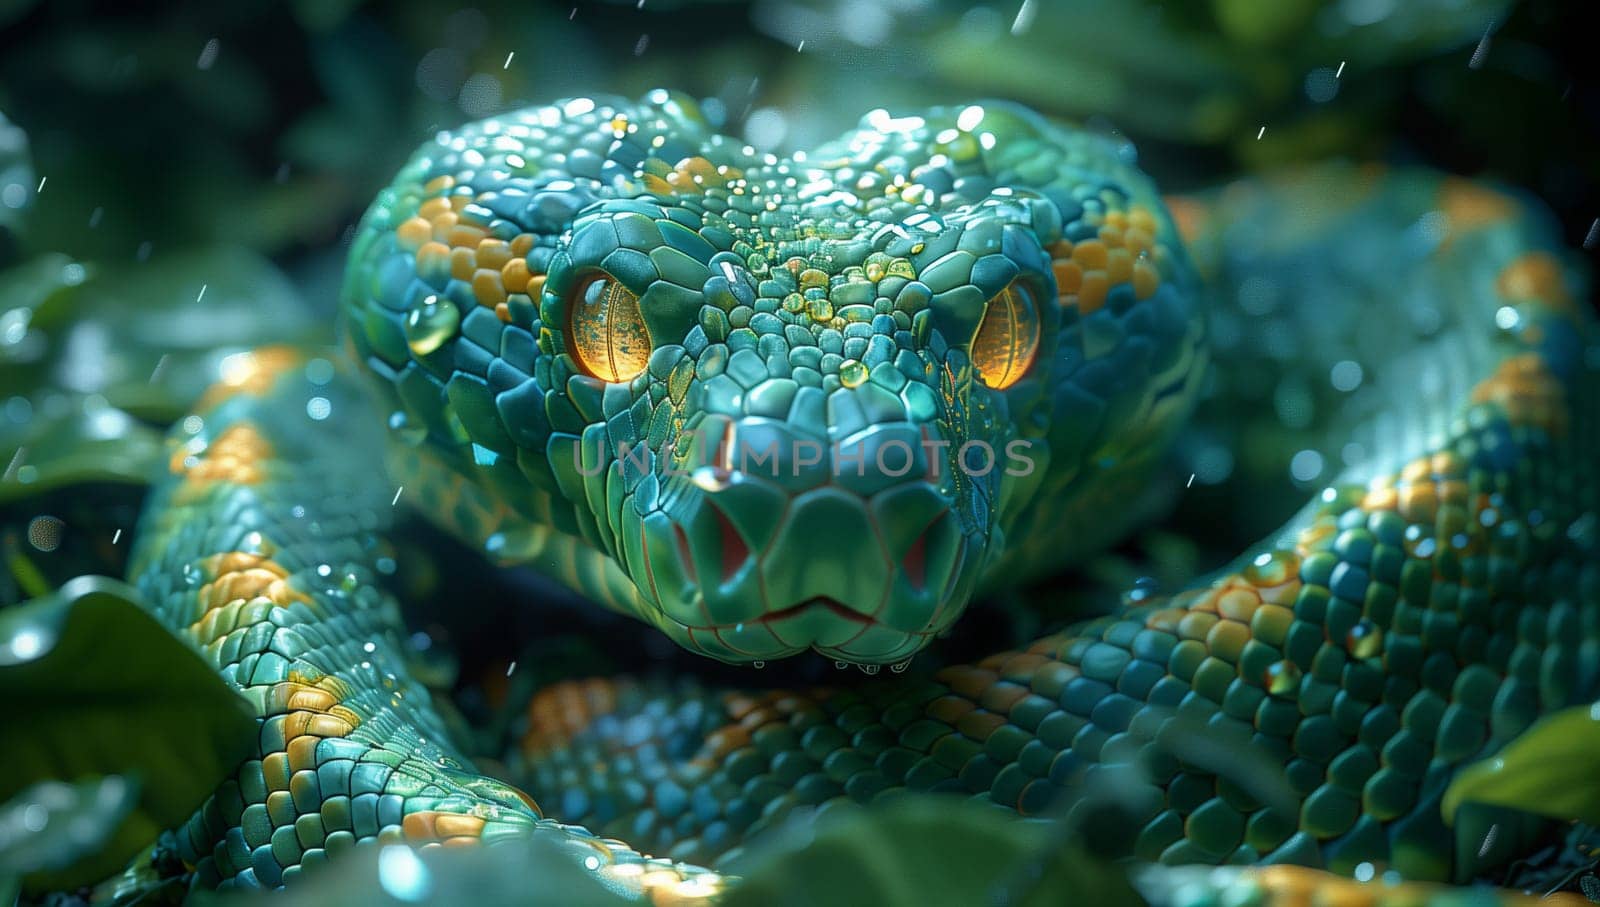 Closeup shot of a blue and gold reptile organism in the jungle by richwolf